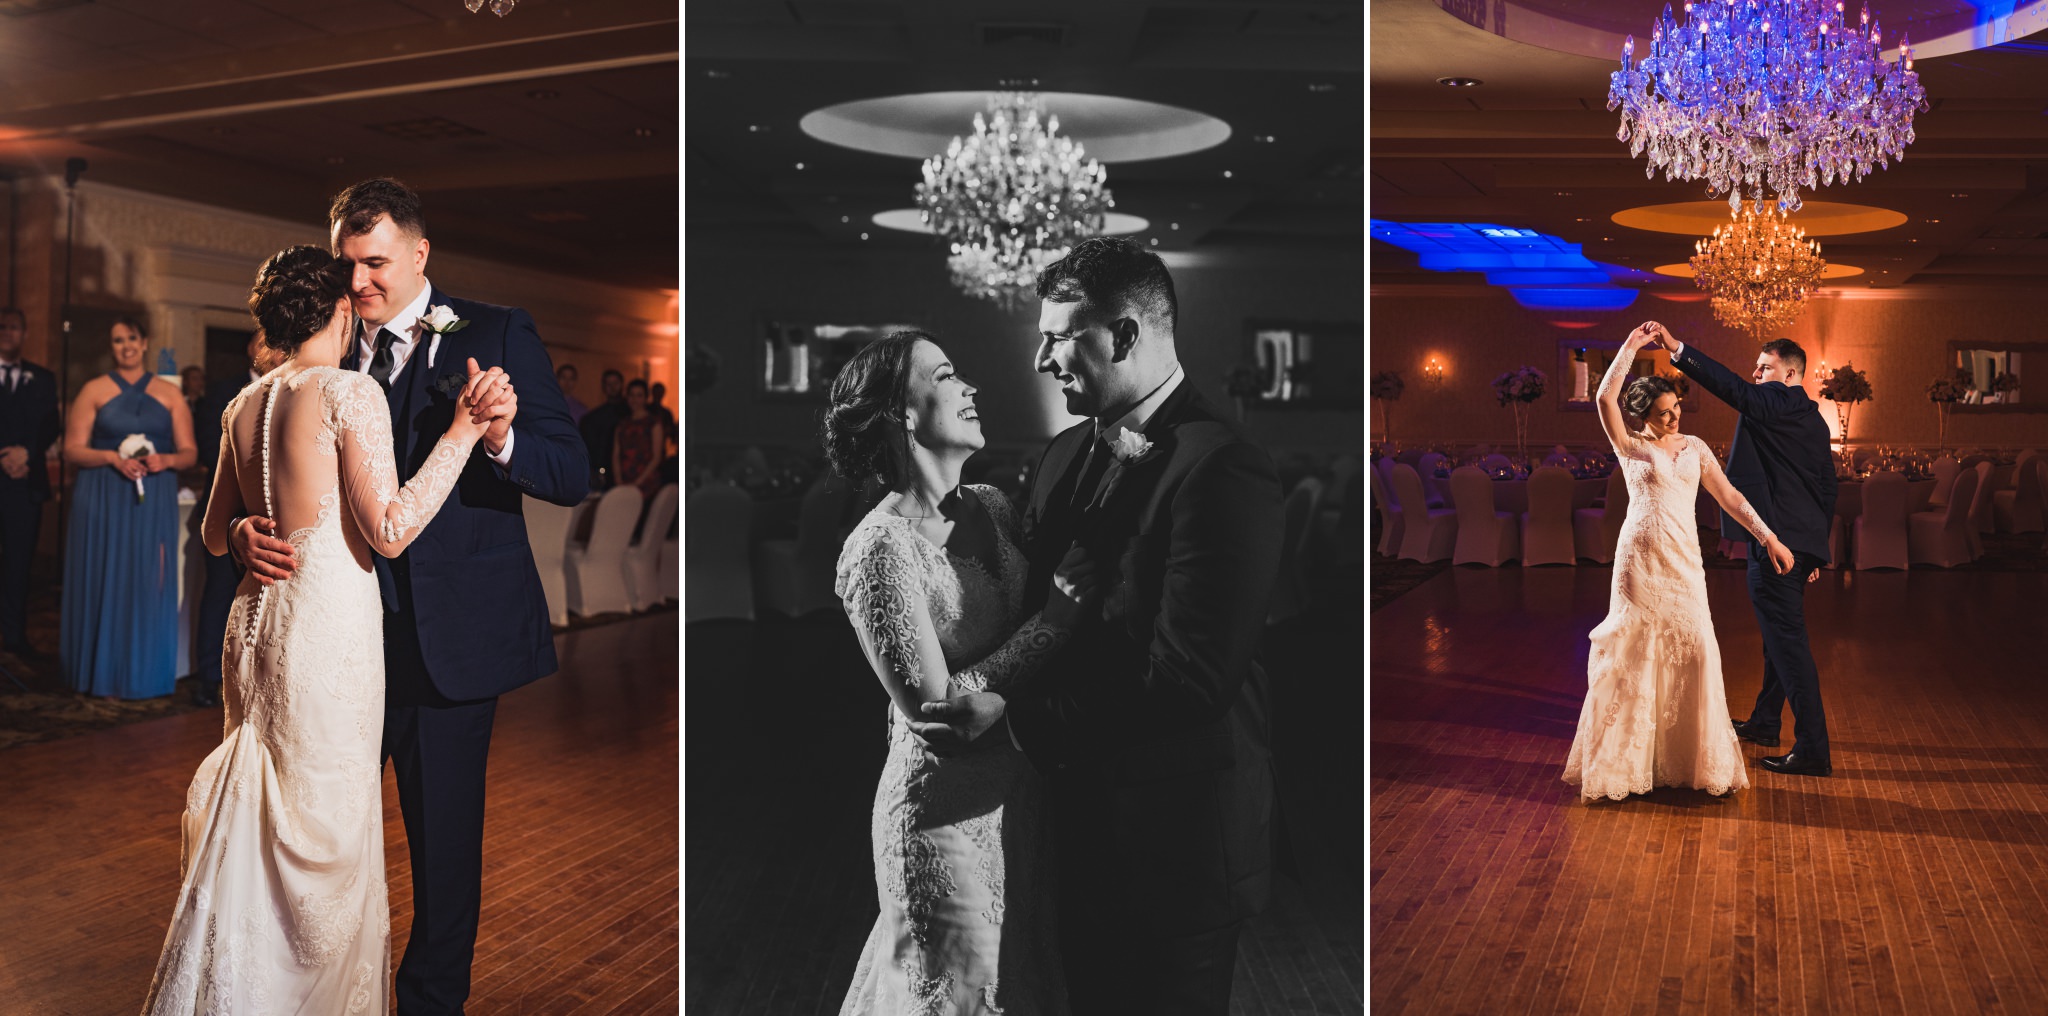  Photos taken during Luke and Kelly's wedding in New Jersey. photographed with a photojournalistic style and with story telling in mind. 

First dance antics. 